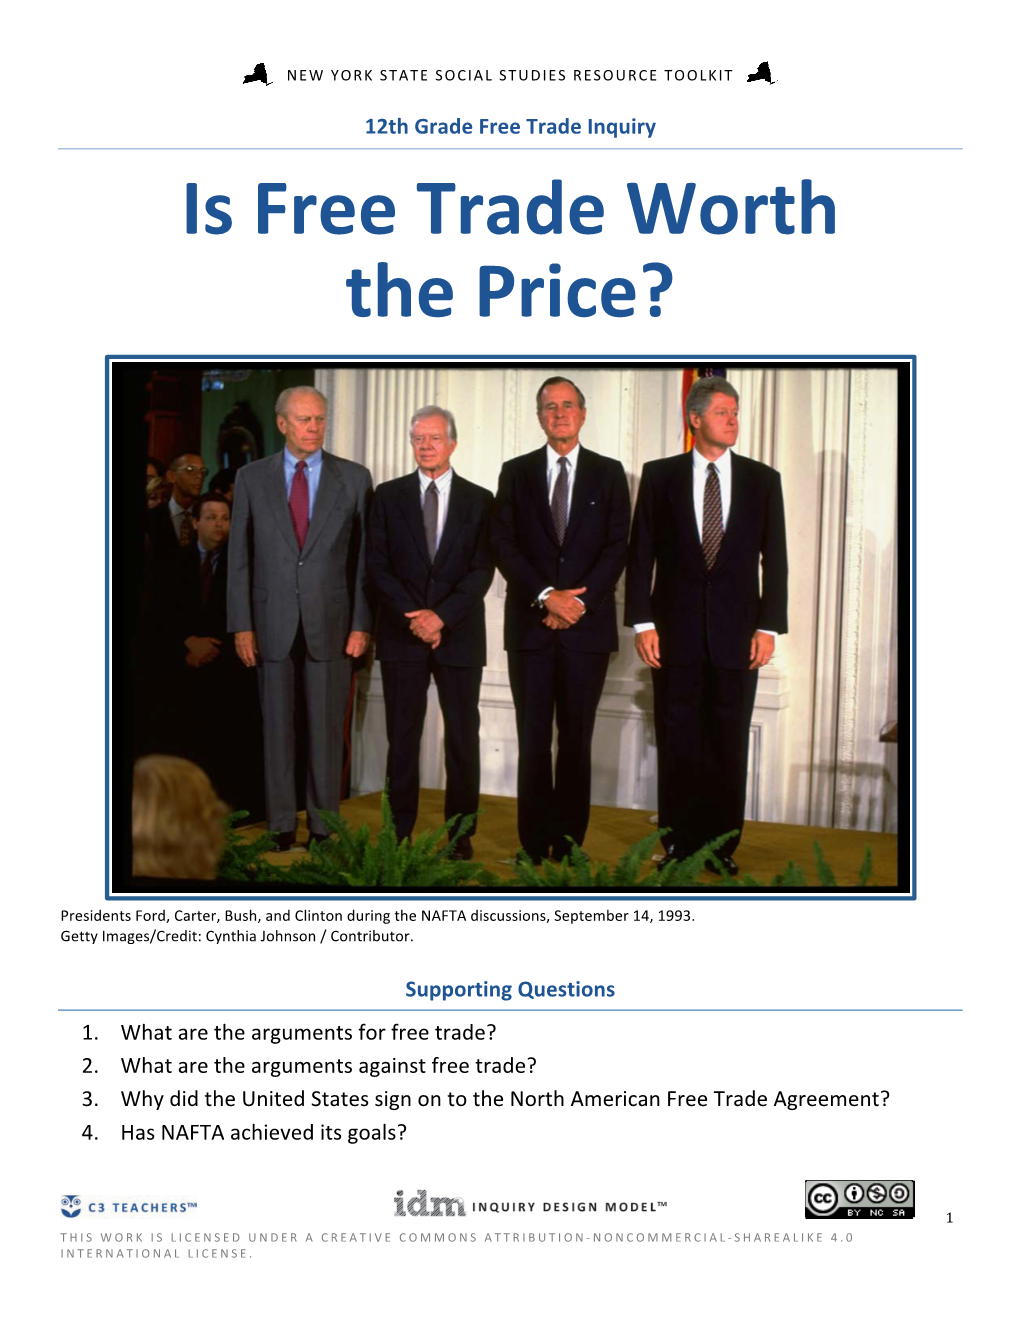 Is Free Trade Worth the Price?